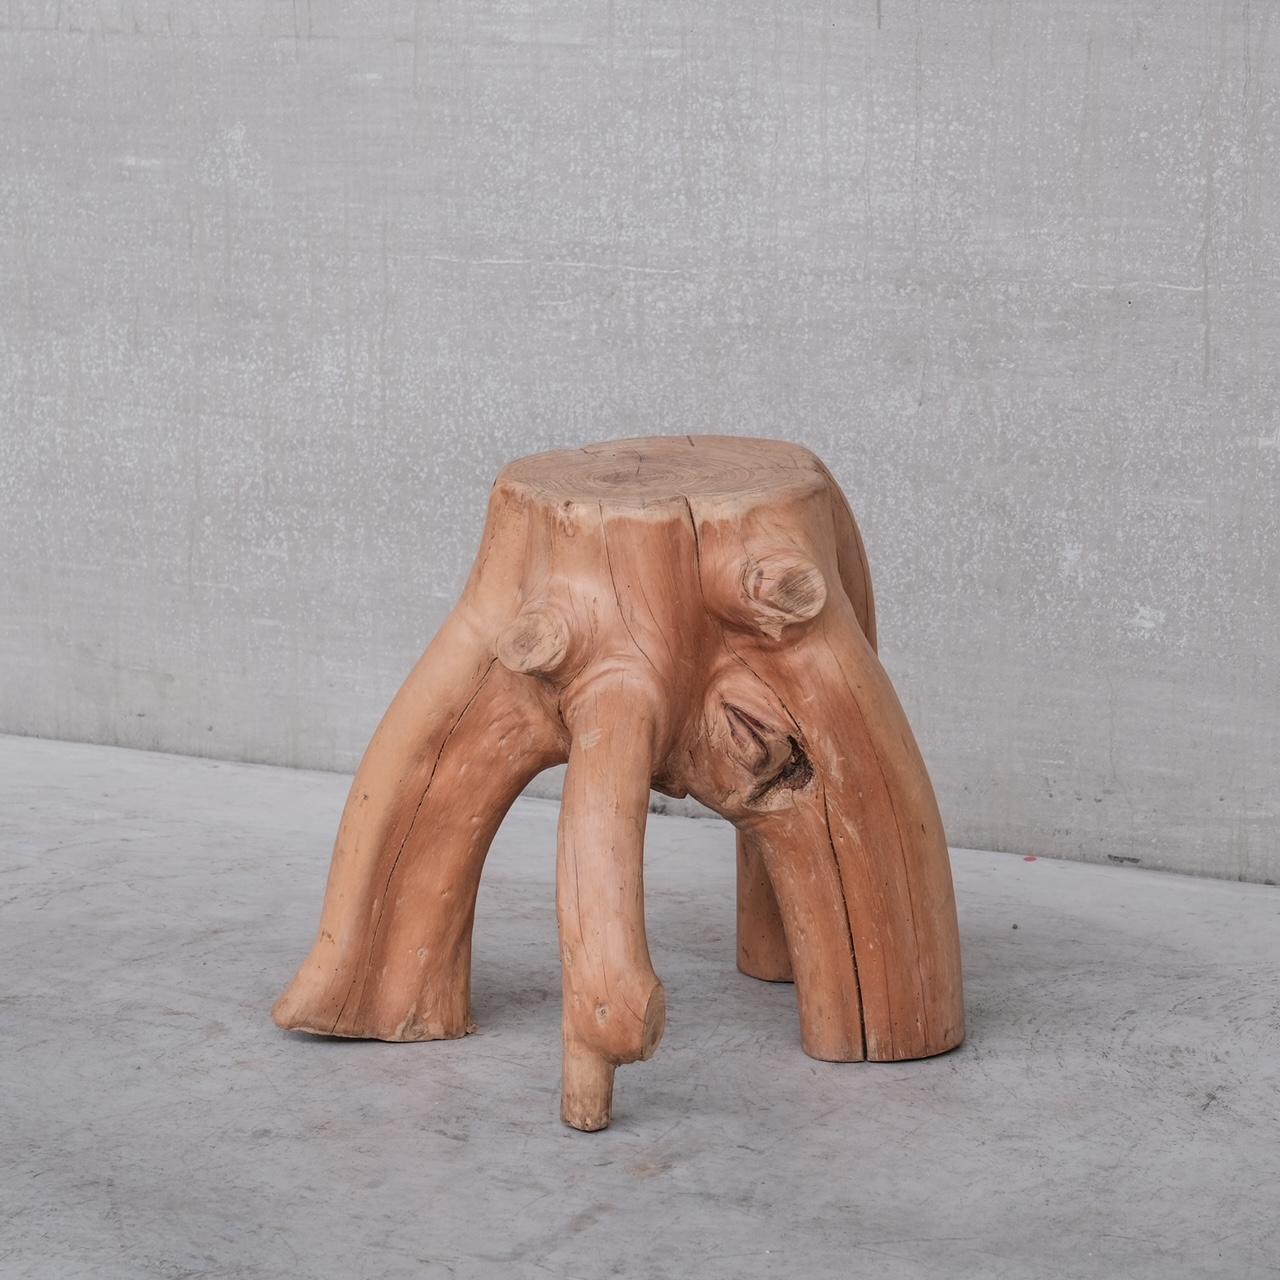 A wooden natural stump of sculptural form. 

Ideal as a side table or sculpture stand. 

France, c1950s, perhaps earlier. 

Remains in good condition, usable and stylish. 

Location: Belgium Gallery. 

Dimensions: 50 H x 60 W x 57 D in cm.